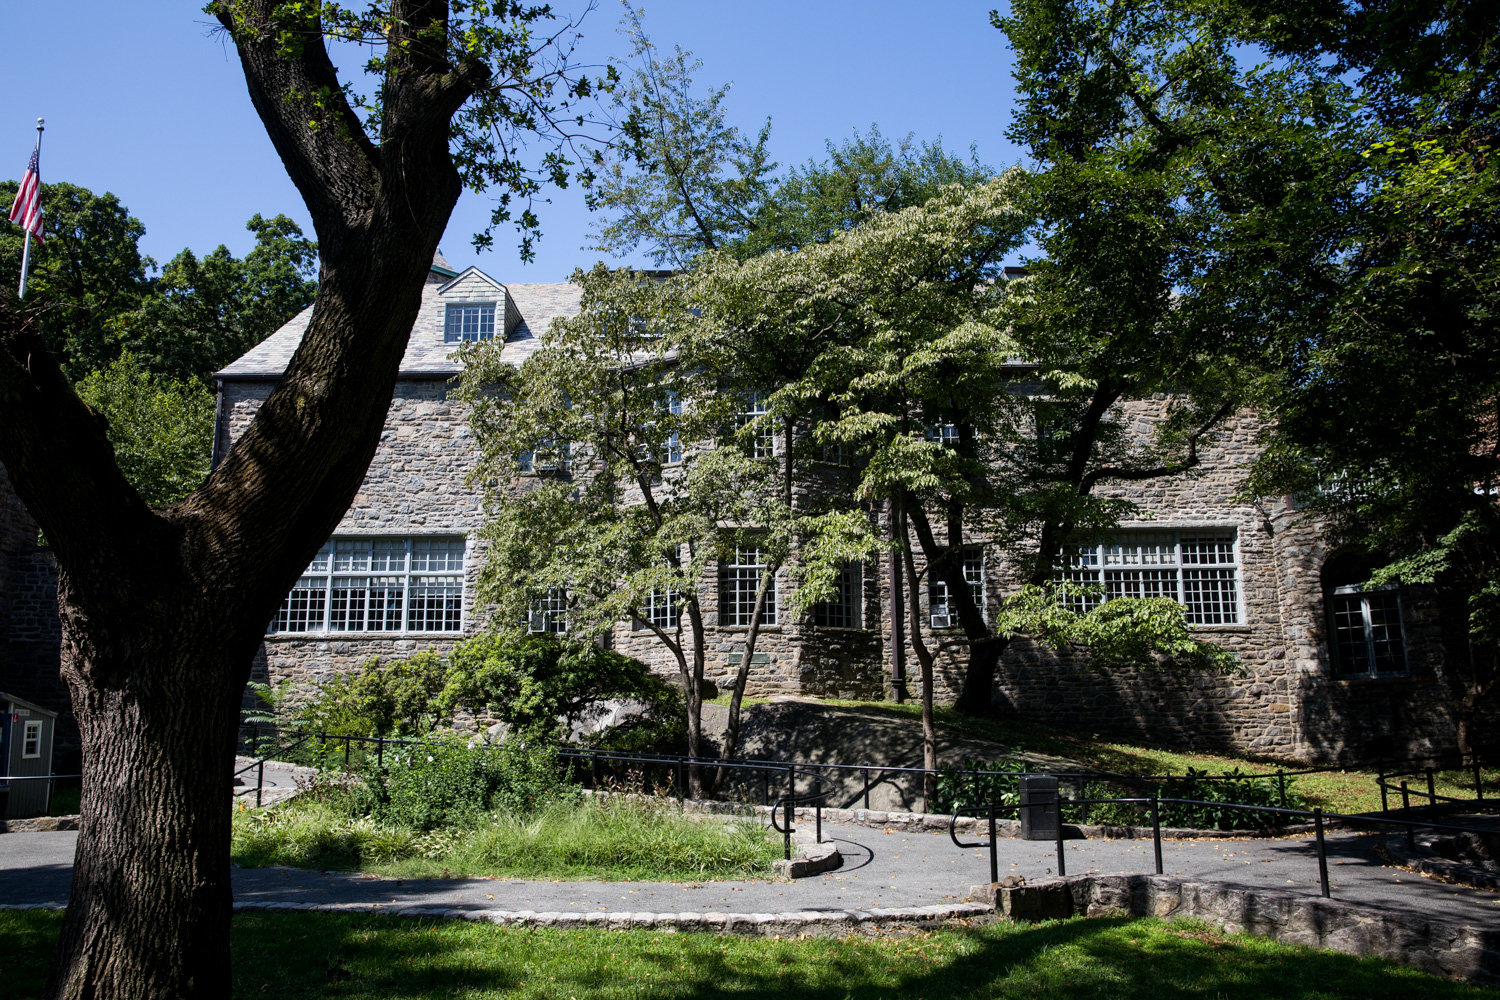 A year after perceived racial issues prompted a sit-in, Ethical Culture Fieldston School has found itself in the middle of another controversy after a guest speaker at the school made remarks some claim are anti-Semitic. The school subsequently fired history teacher J.B. Brager, after they responded on social media with comments some have labeled as anti-Israel.